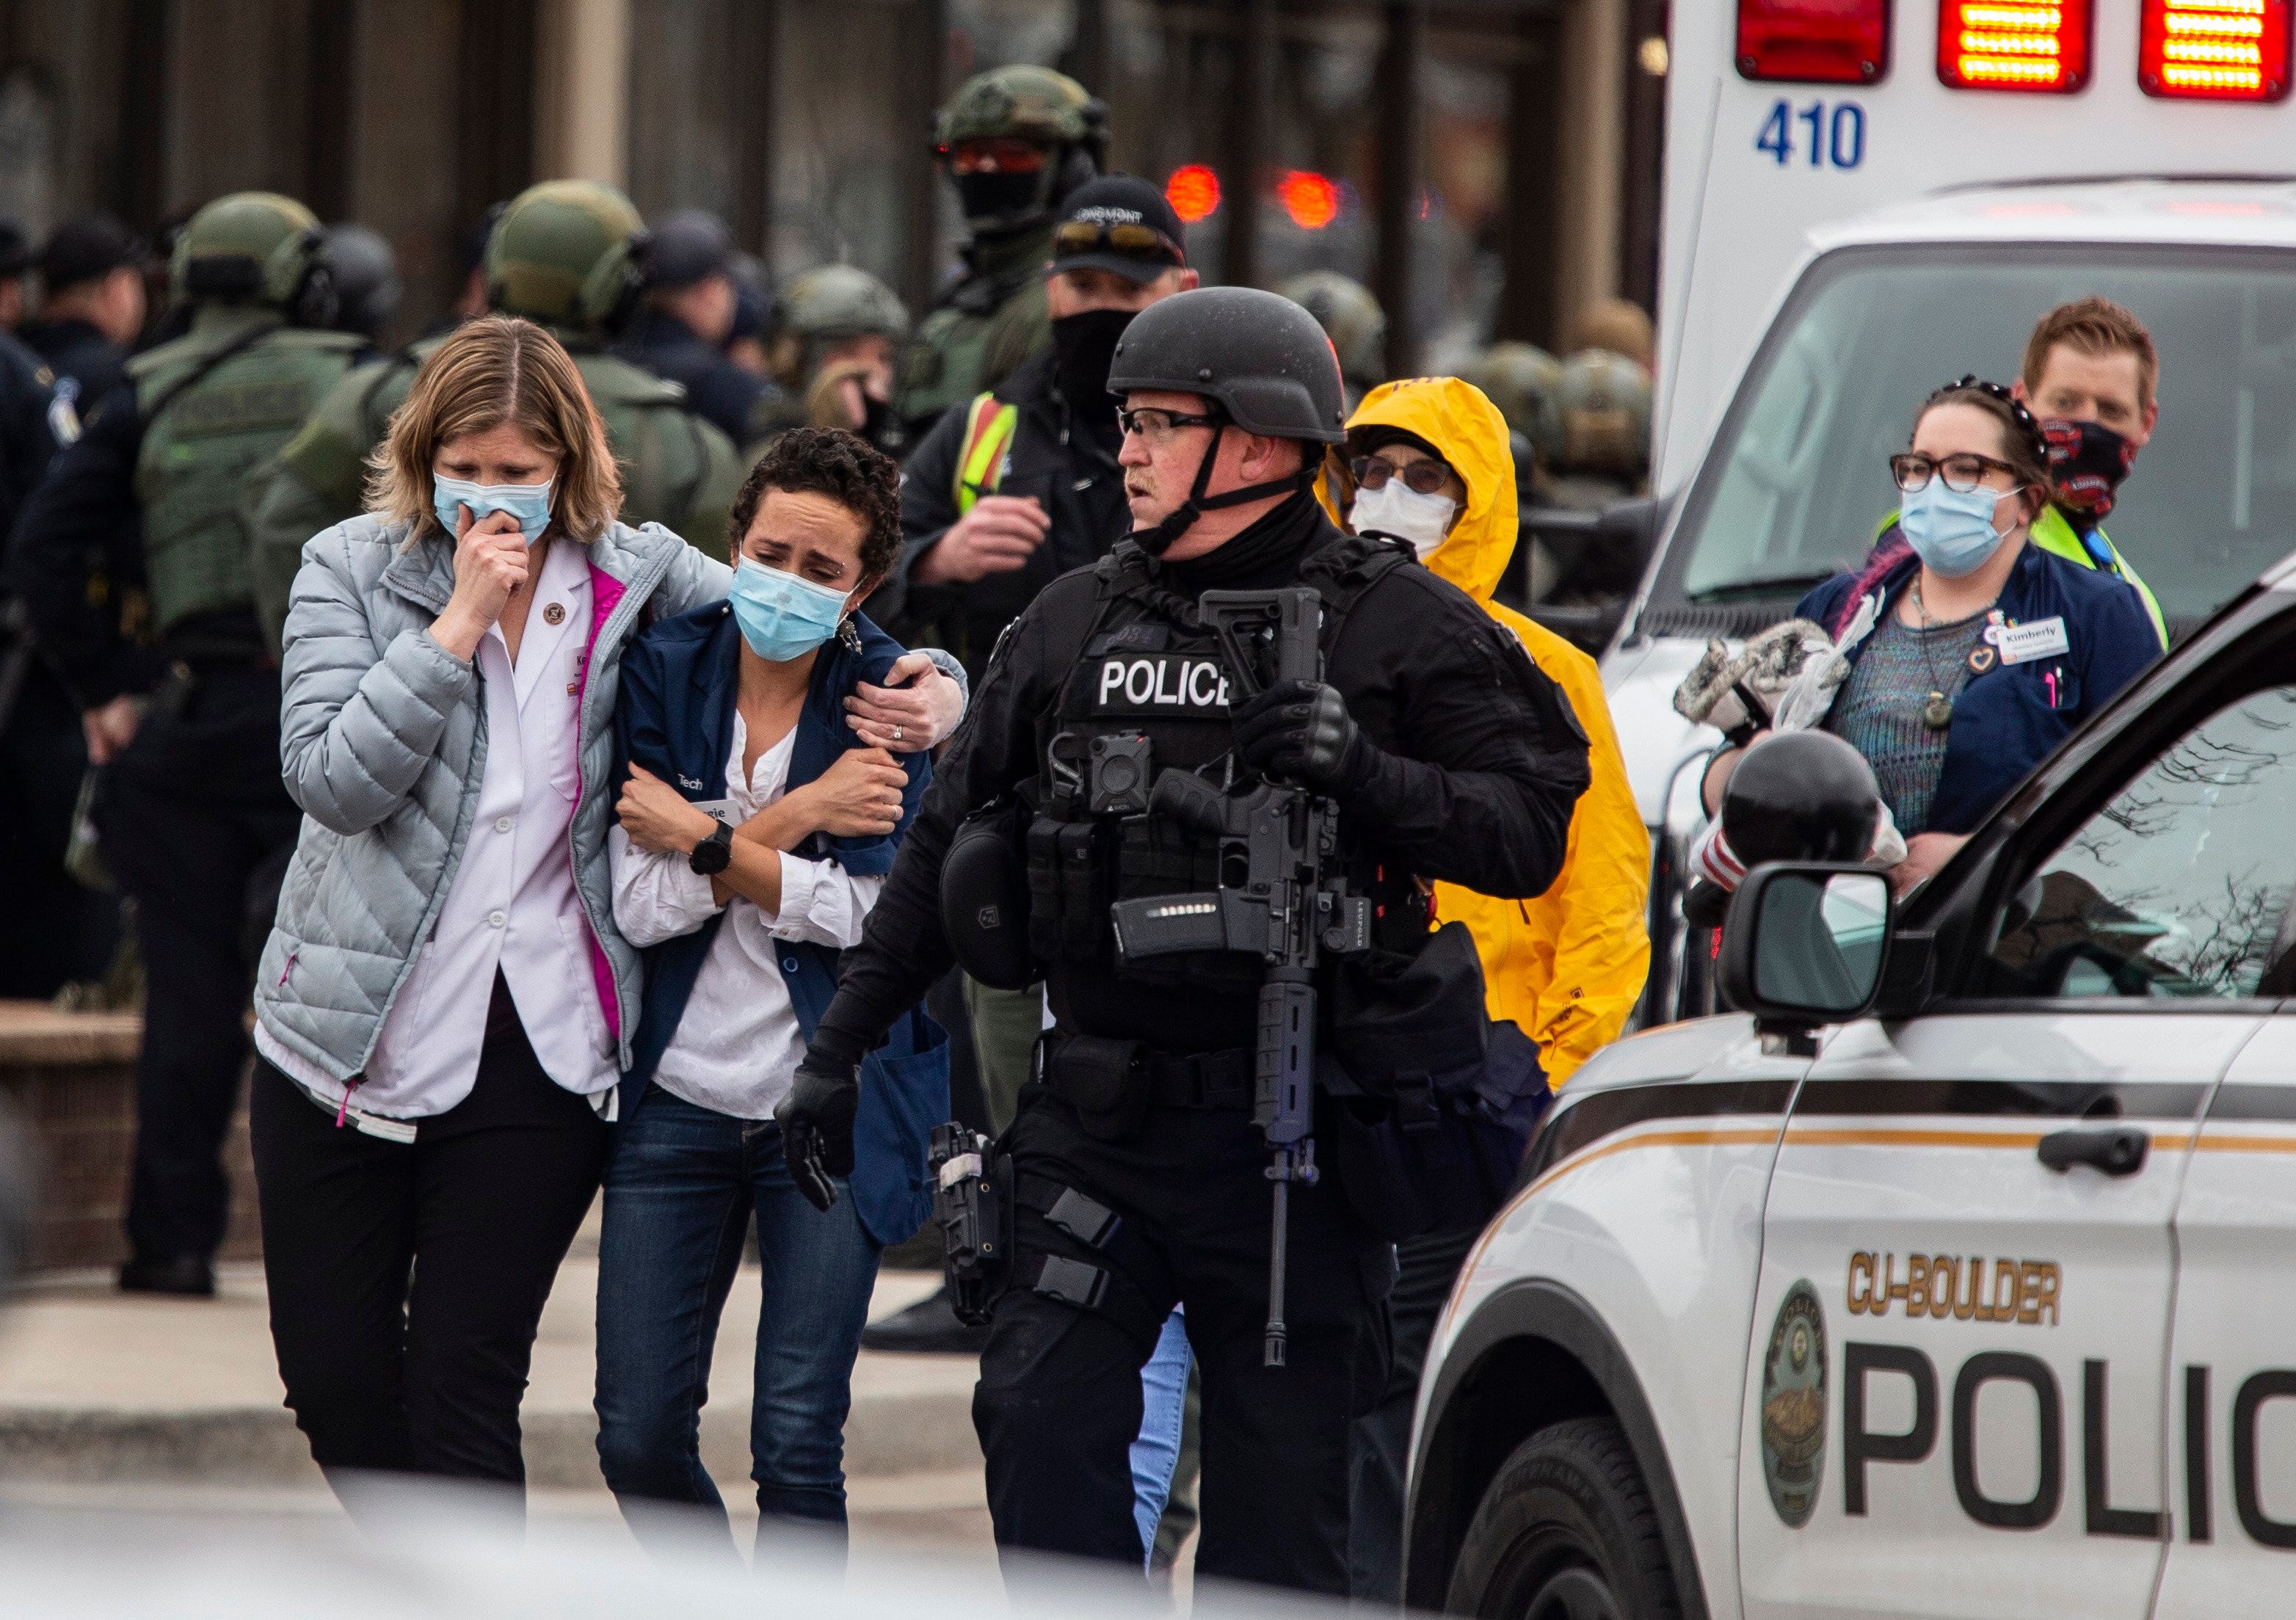 Healthcare workers walk out of a King Sooper&apos;s Grocery store after a gunman opened fire on March 22, 2021, in Boulder, Colorado. Dozens of police responded to the afternoon shooting in which at least one witness described three people who appeared to be wounded, according to published reports.  (Chet Strange/Getty Images/TNS)